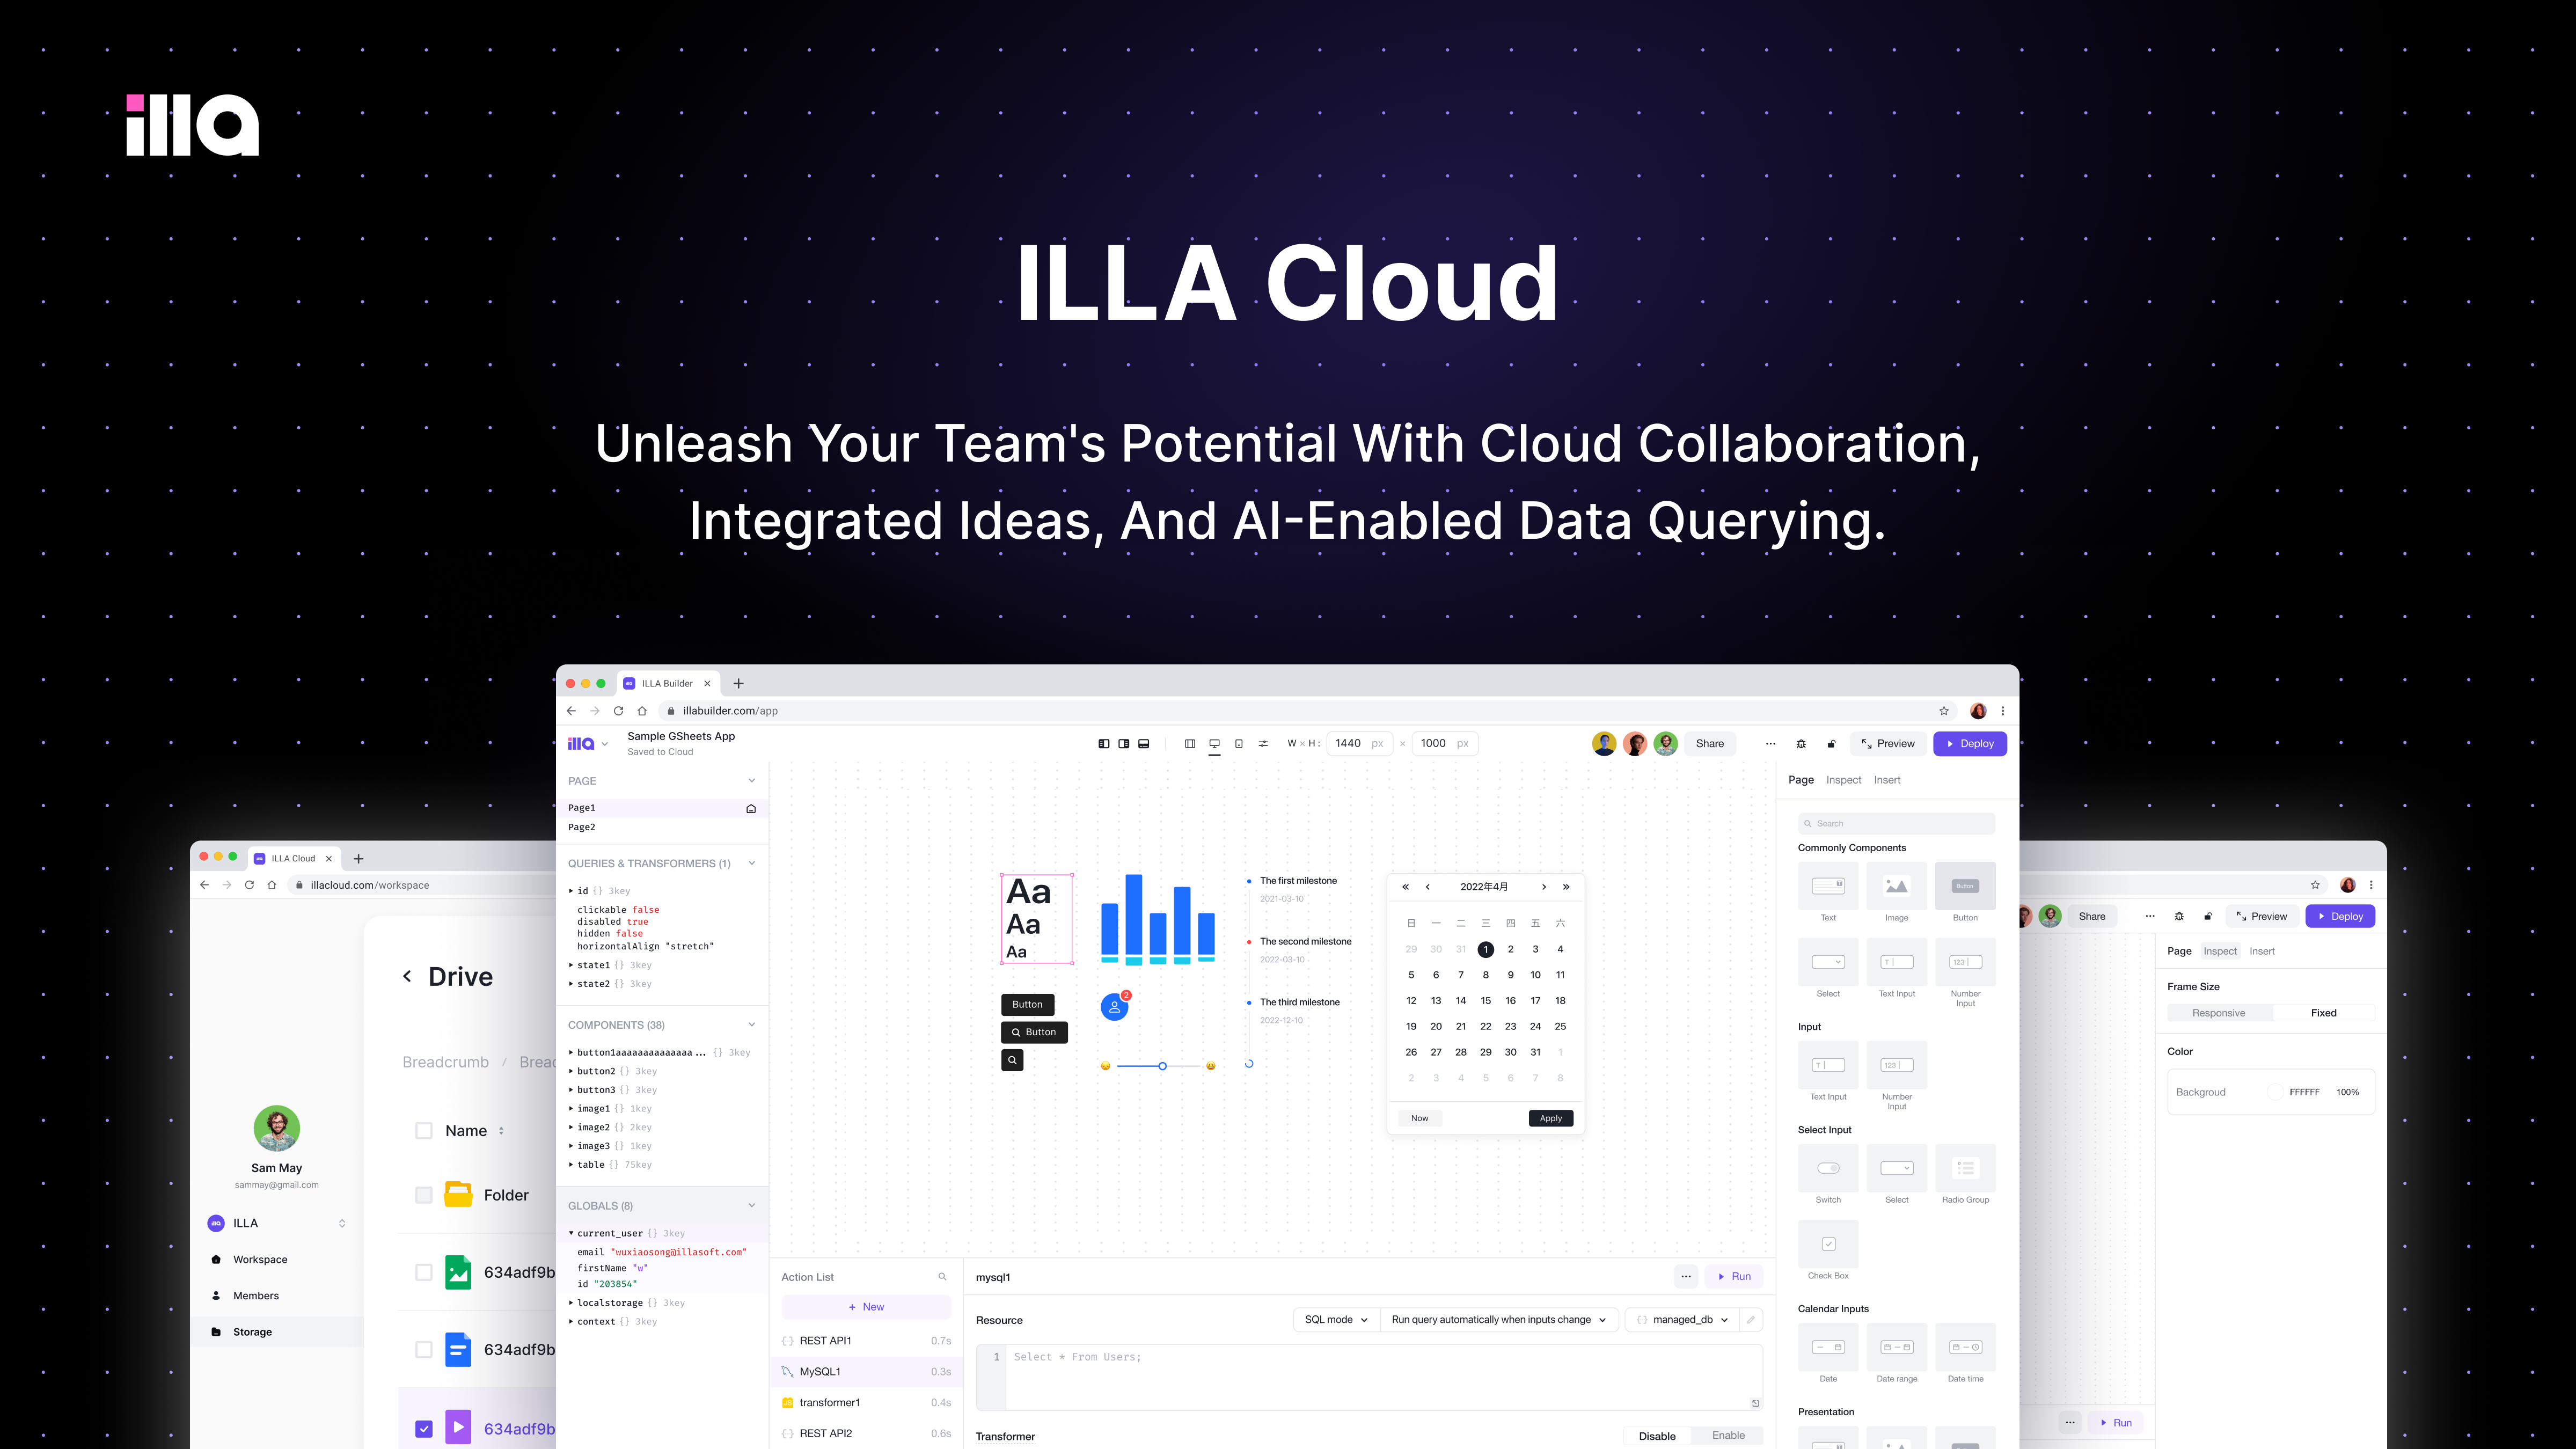 How to Use ILLA Cloud to Create Your Own Customized Chatbot App